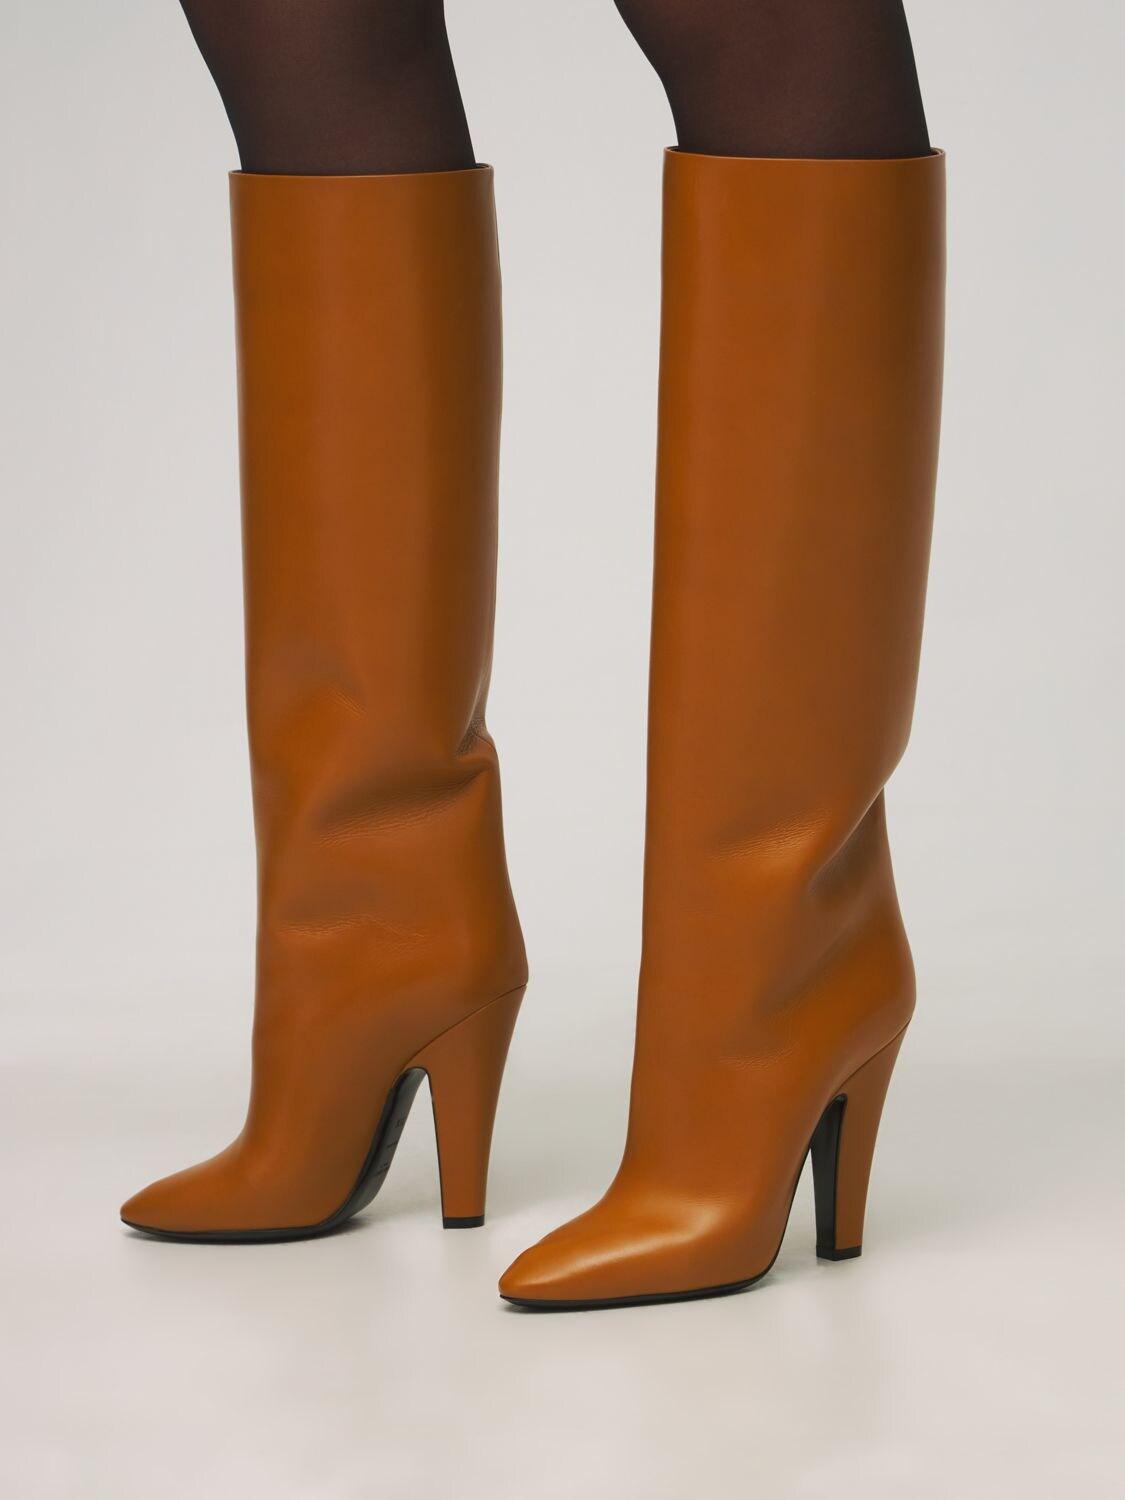 Saint Laurent 110mm 68 Tube Leather Tall Boots in Brown - Lyst